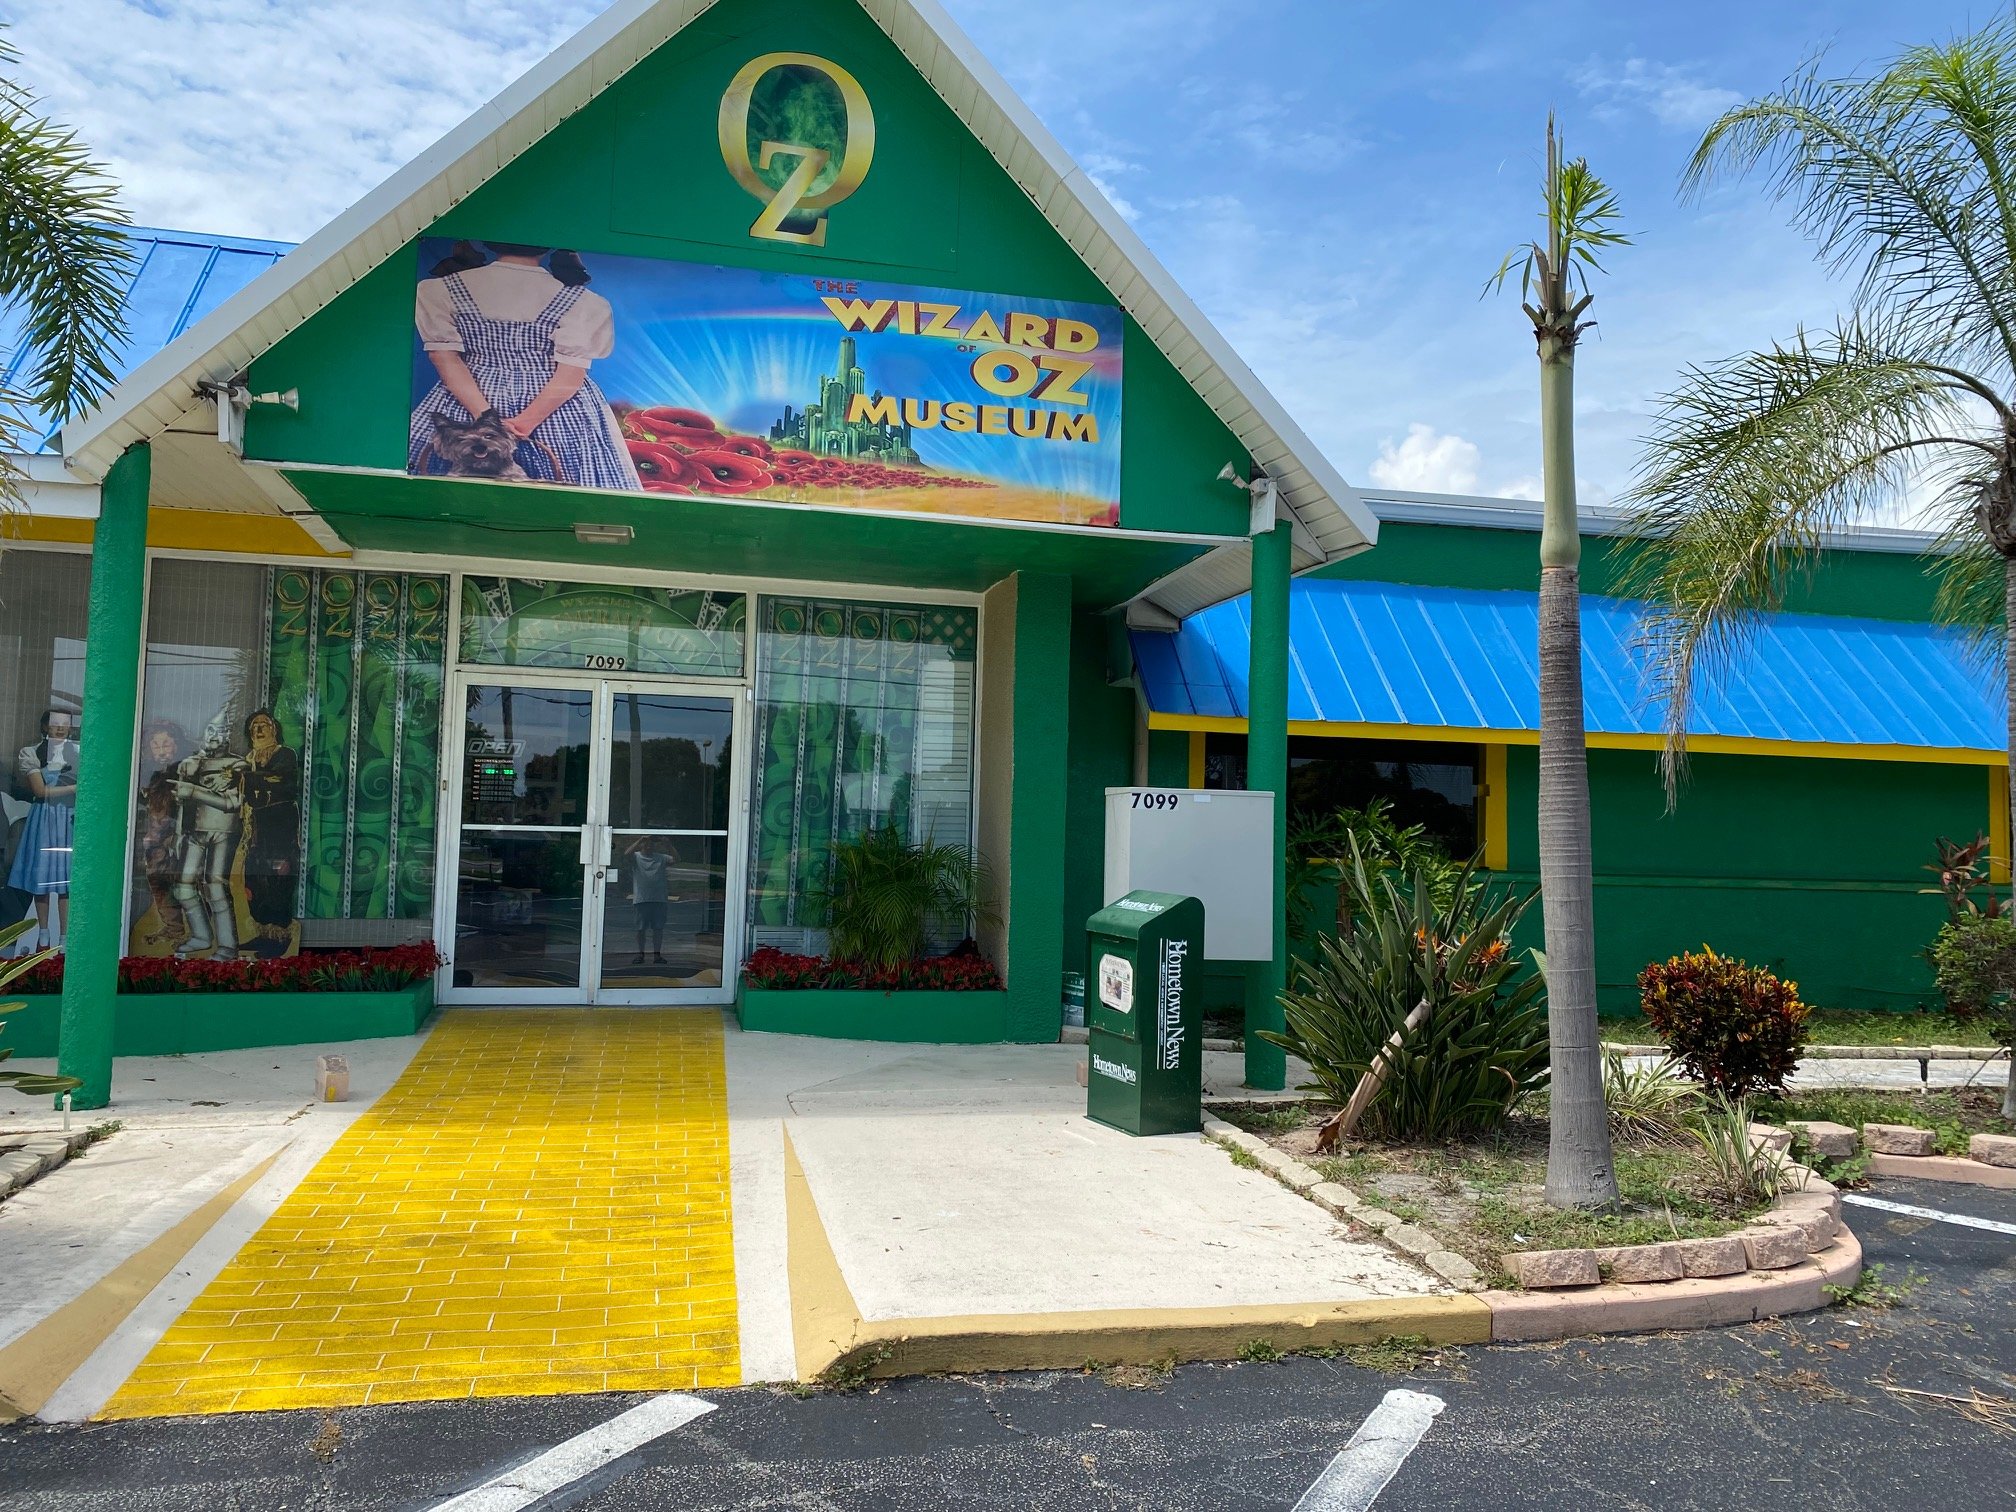 The Wizard of Oz Museum Exterior in Cape Canaveral